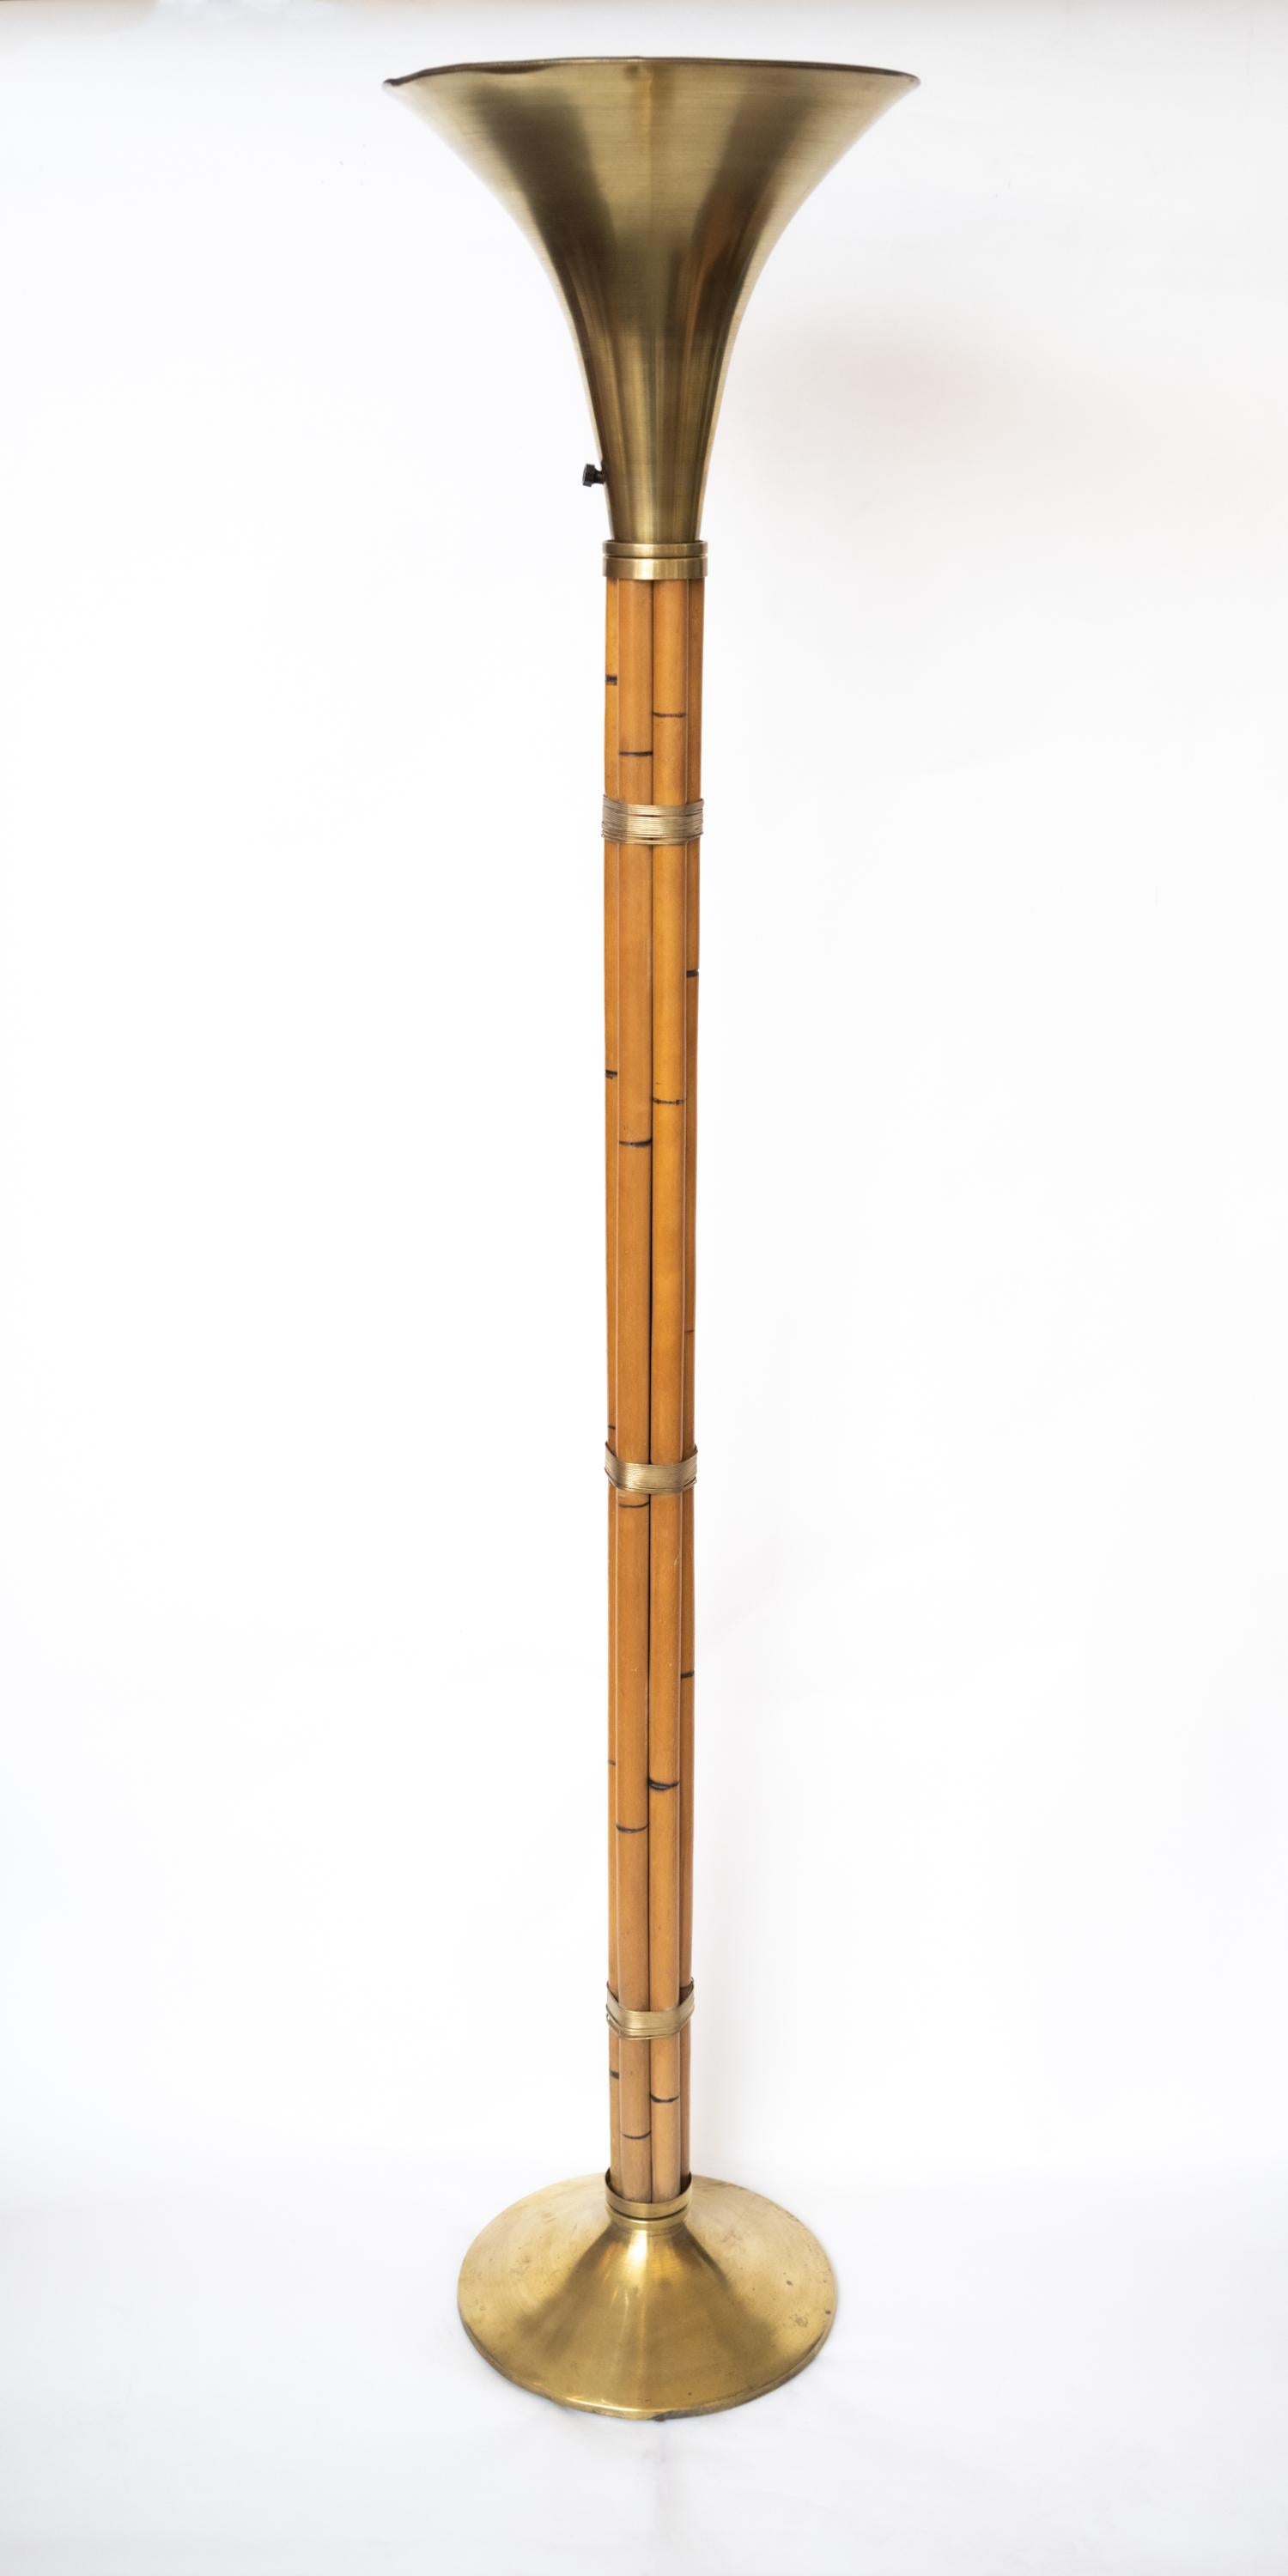 A brass and faux-bamboo floor lamp by American designer Russel Wright (1904-1976) for Raymor having maple rods wrapped in solid brass wire with bases and tops made in solid spun brass, circa 1950.